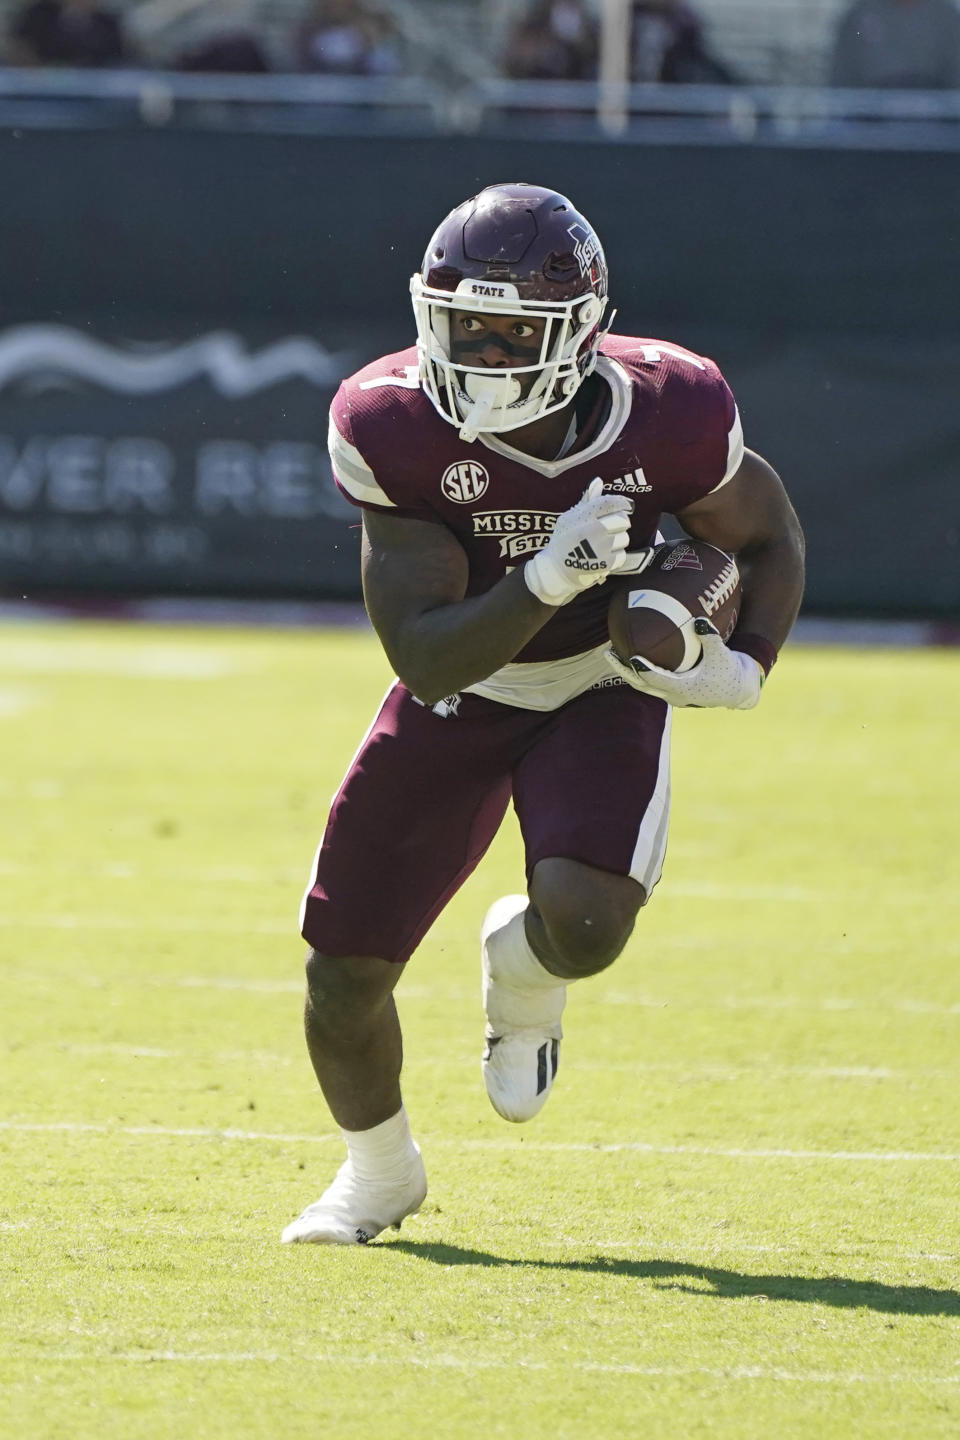 Mississippi State running back Jo'quavious Marks (7) runs upfield during the first half of an NCAA college football game against Arkansas in Starkville, Miss., Saturday, Oct. 8, 2022. (AP Photo/Rogelio V. Solis)